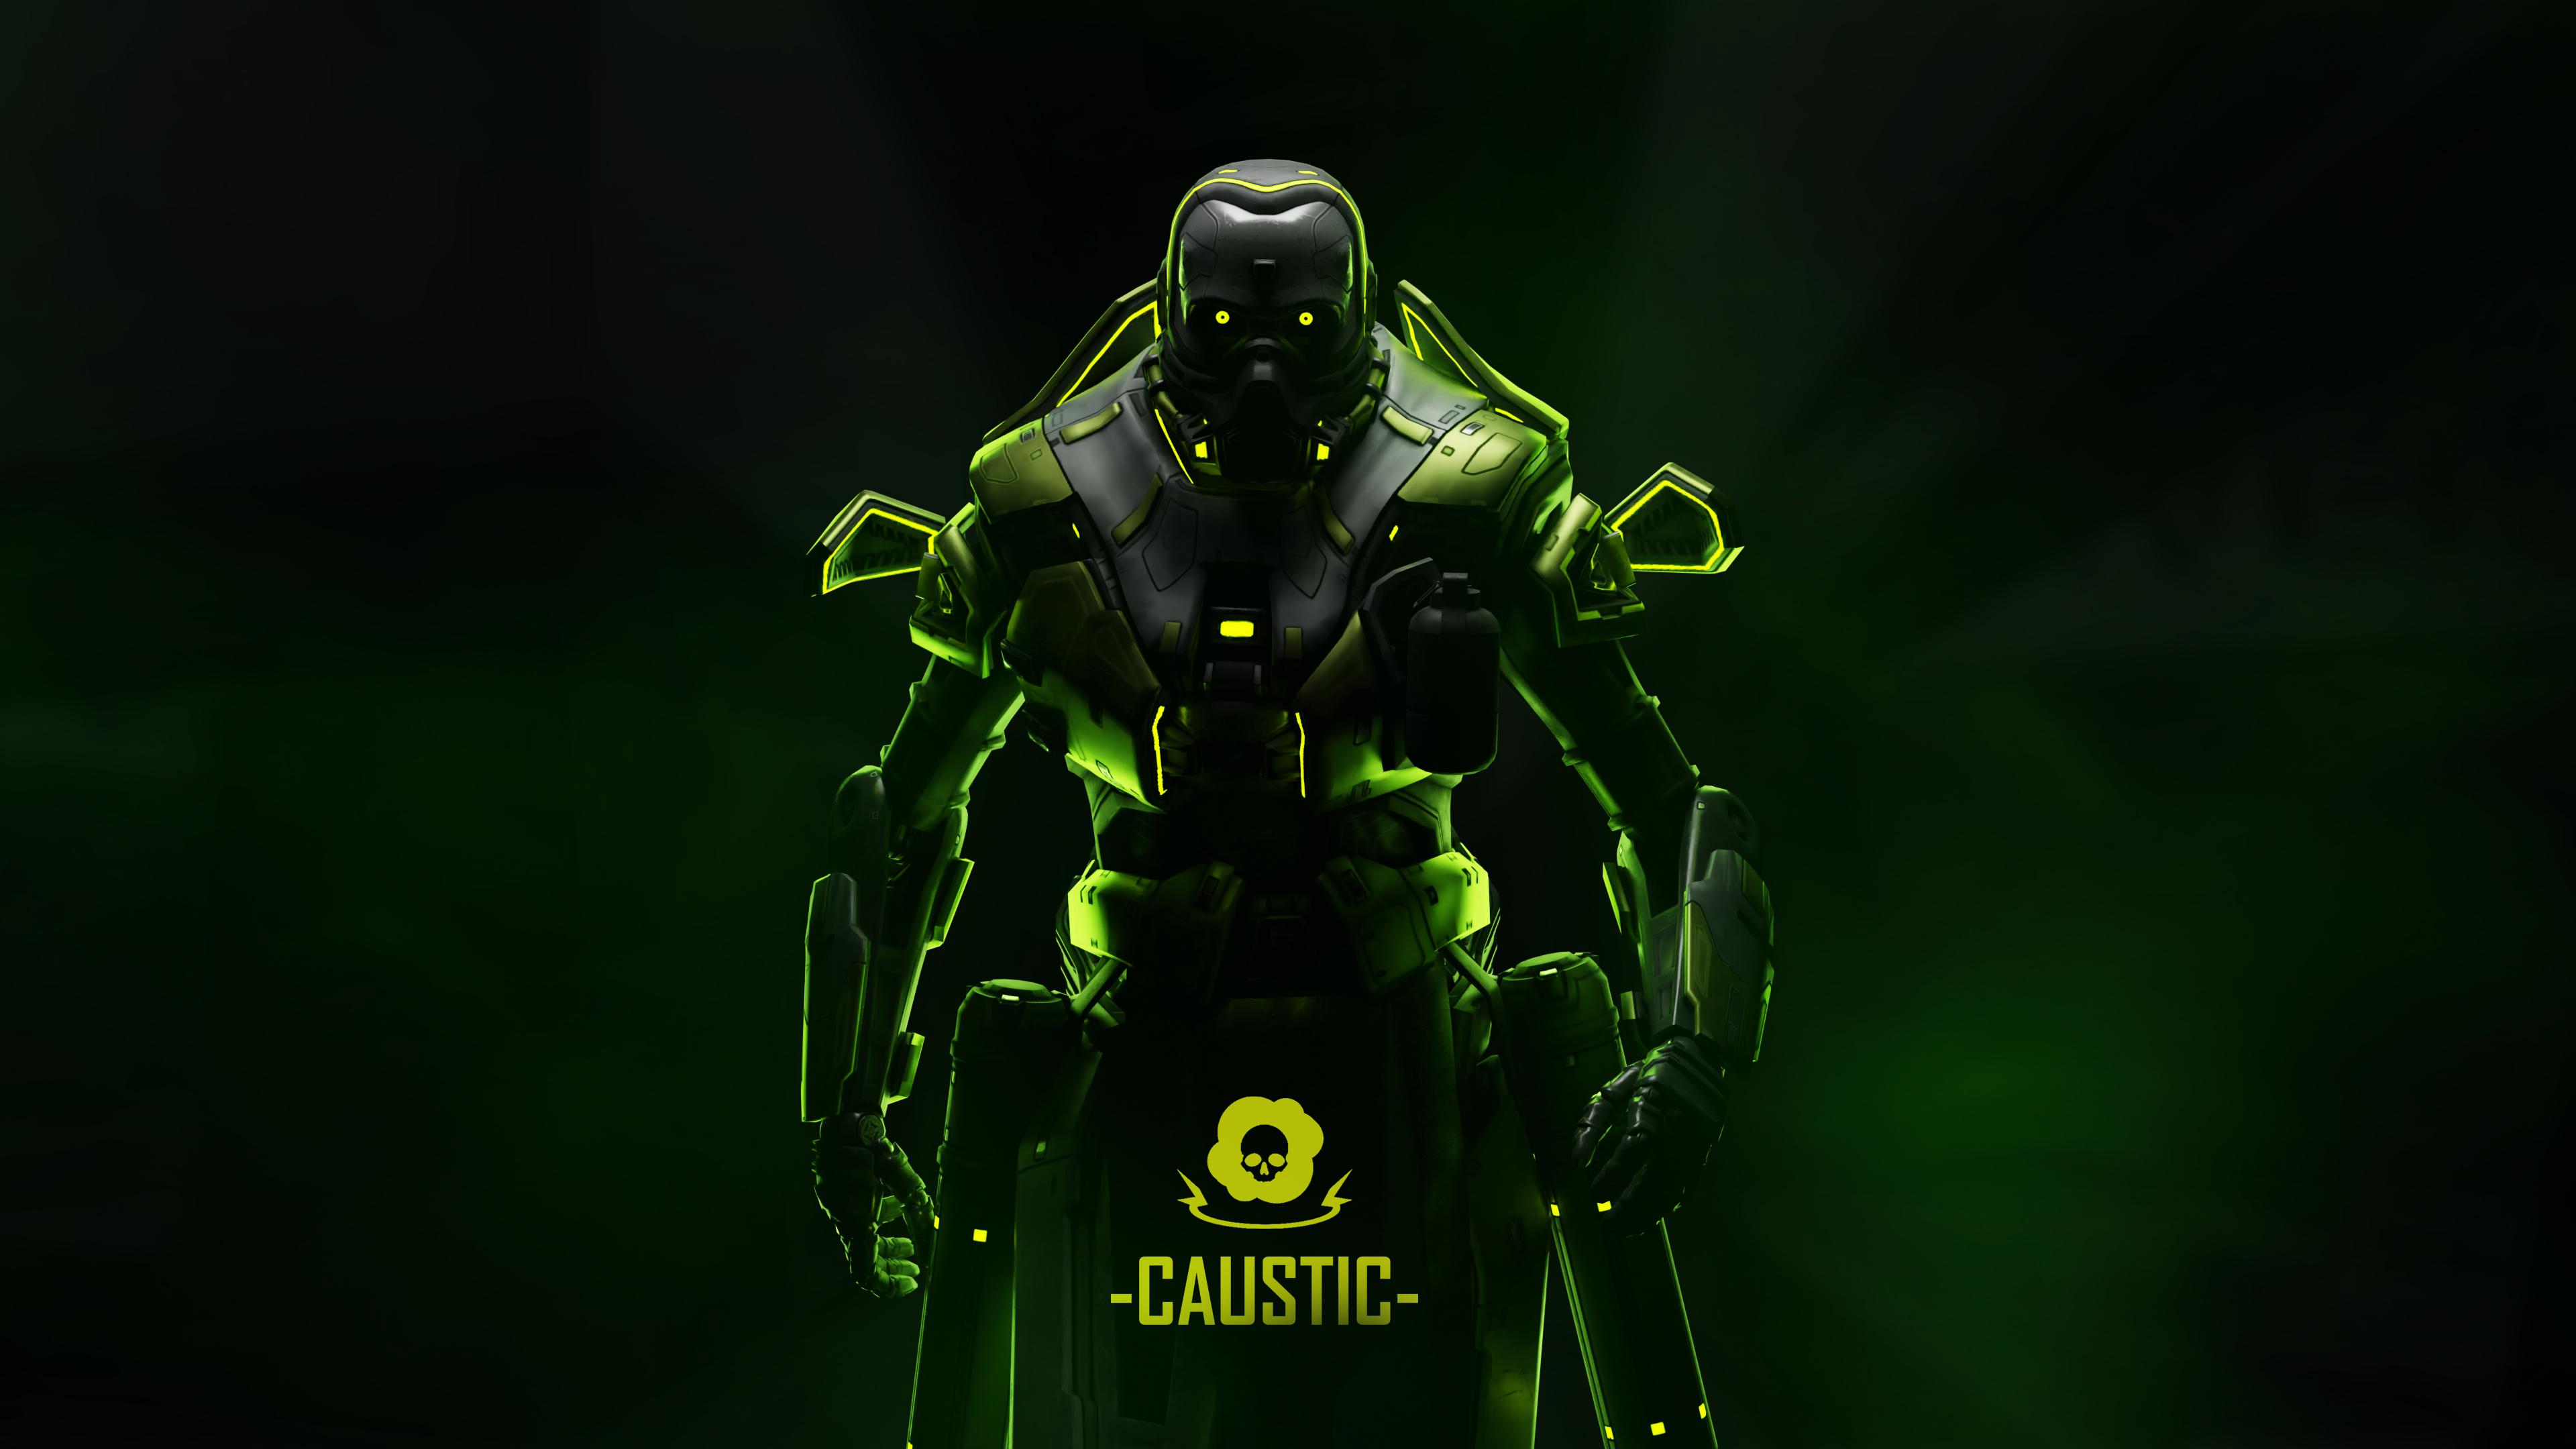 Caustic 4k Wallpaper A Lot You Requested For Other Skins But I